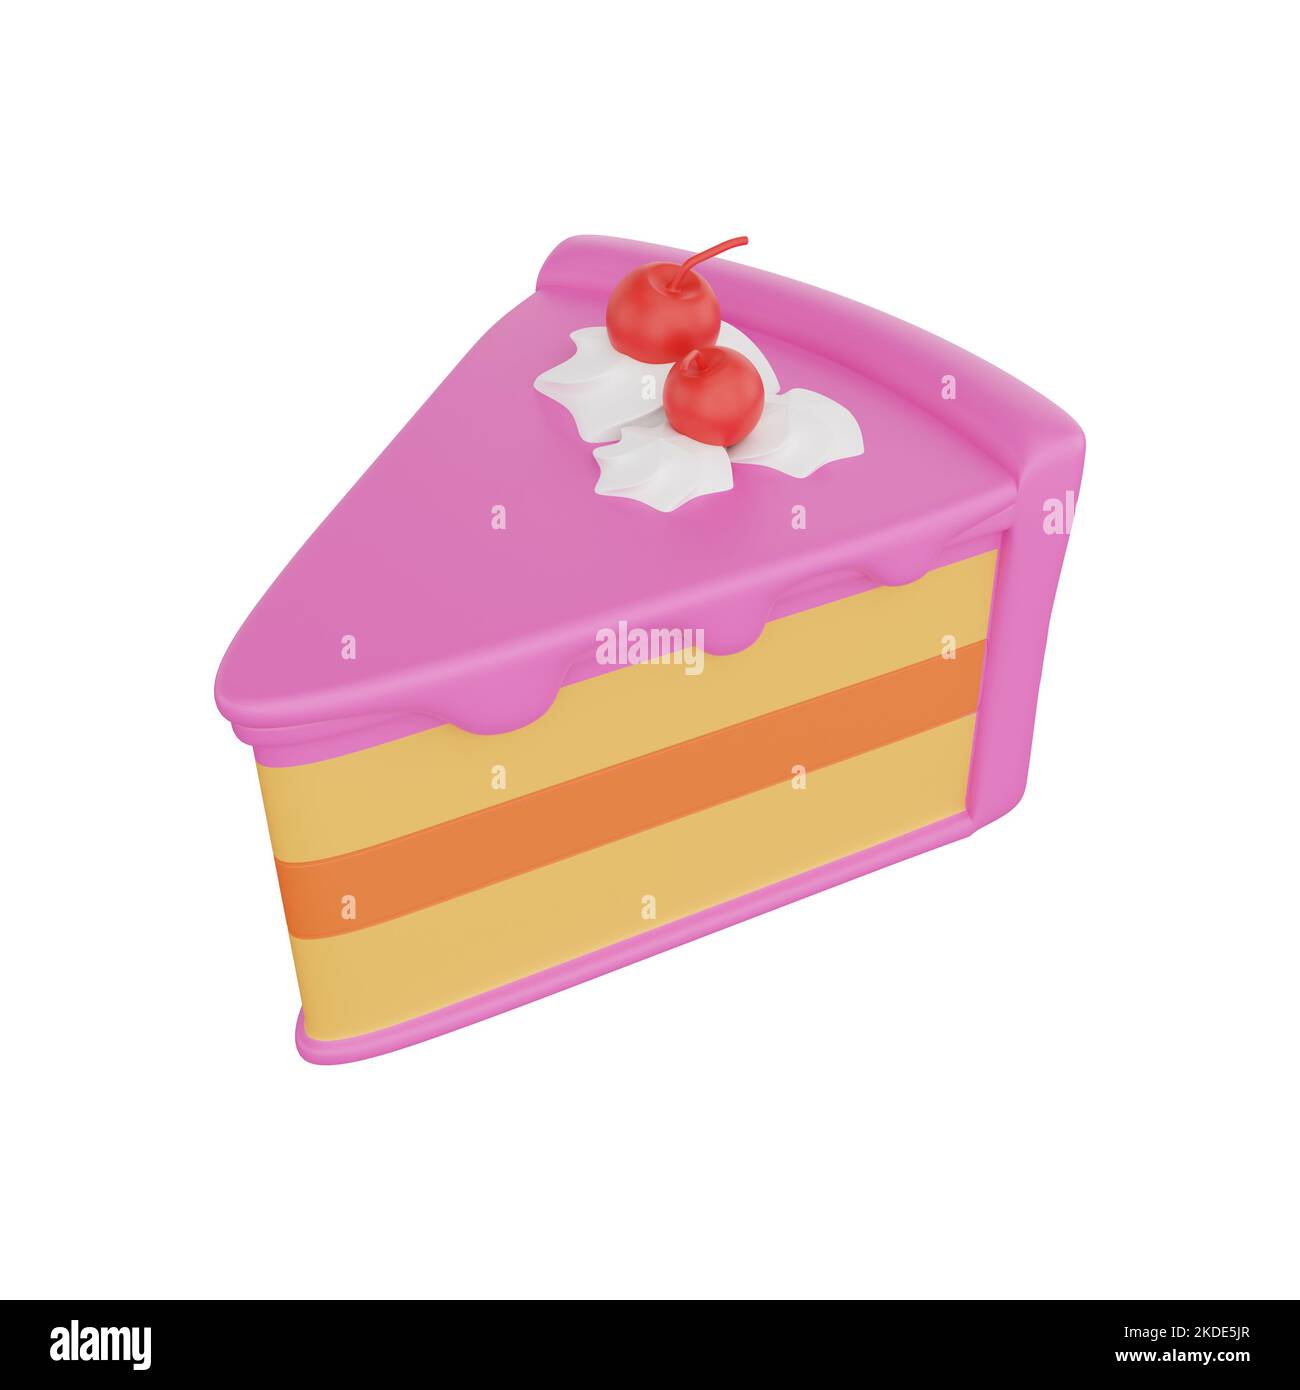 3d rendering of slice cake fast food icon Stock Photo